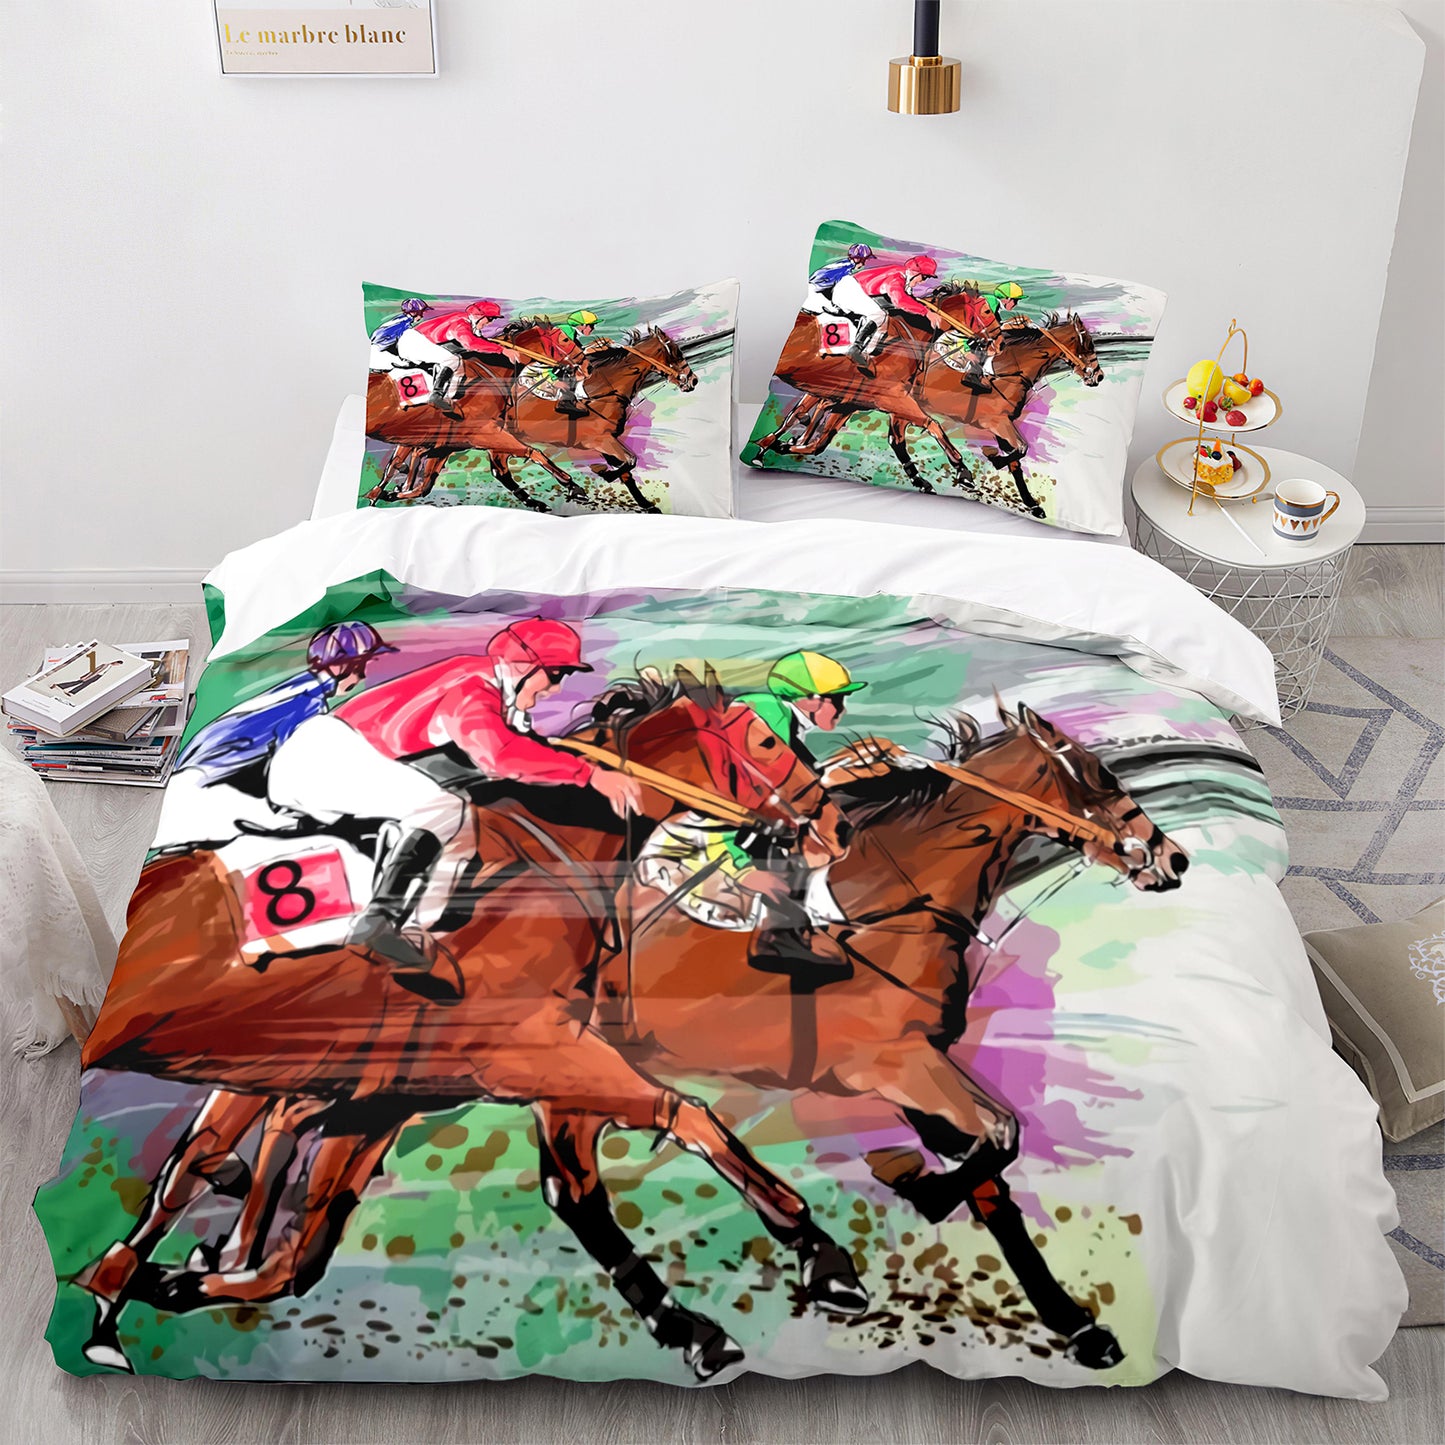 Cutom Duvet Cover Set Pattern Chic Comforter Cover King Size for Teens Adults Bedding Set with Pillowcases  M1026